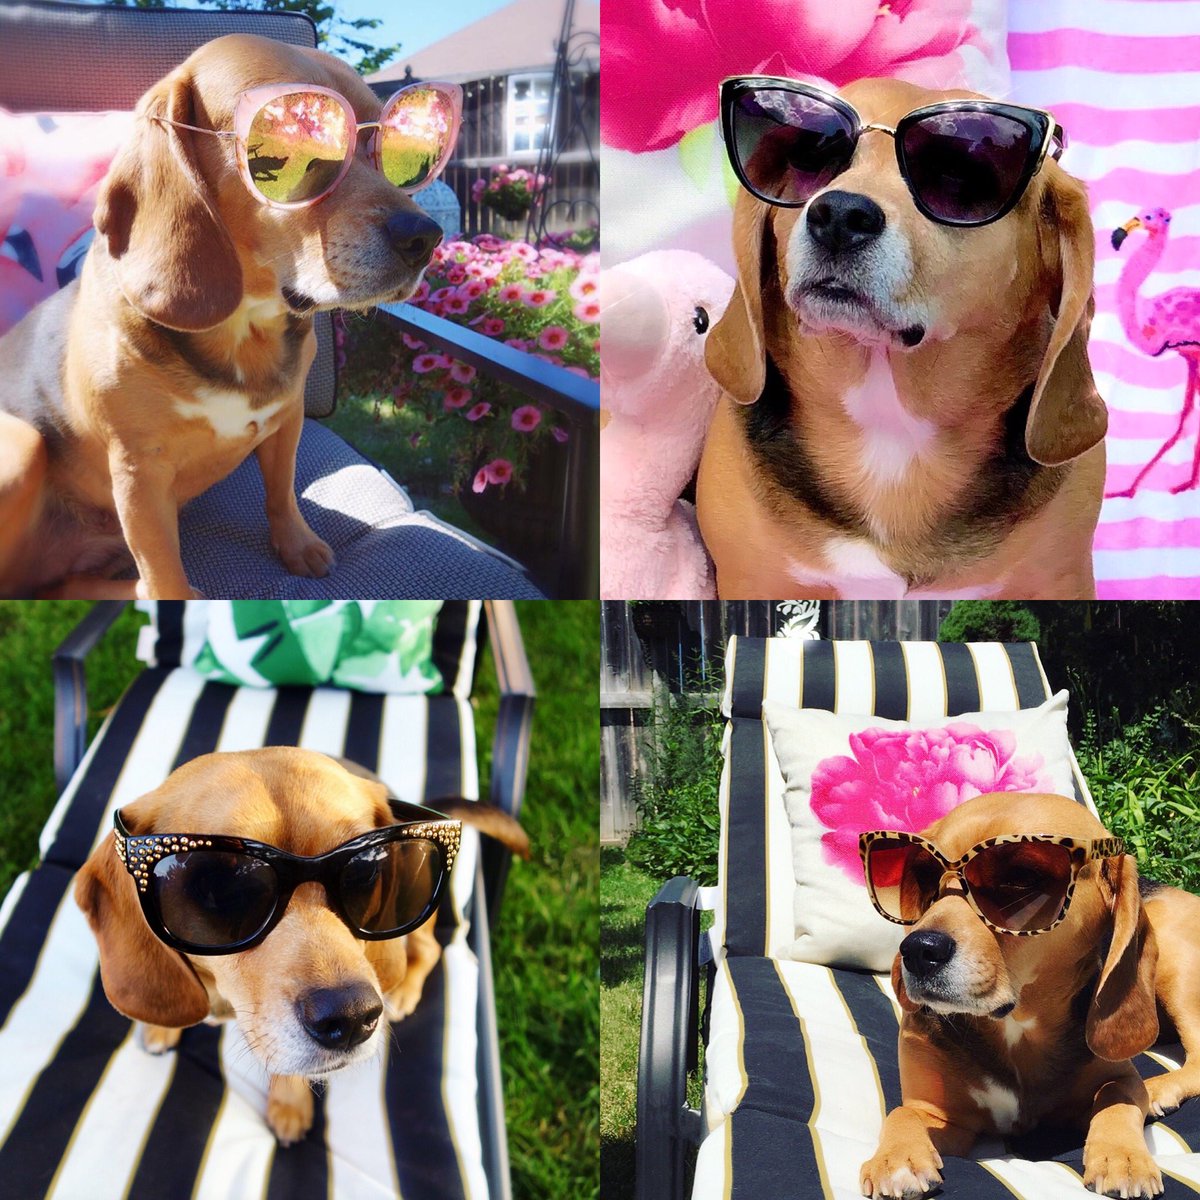 So apparently it’s #NationalSunglassesDay So in honour of it, here’s my #fashionista #Beagle modelling her faves...😂💖😎🐶💖

#BeaglesOfTwitter #BHGPets #DogModel